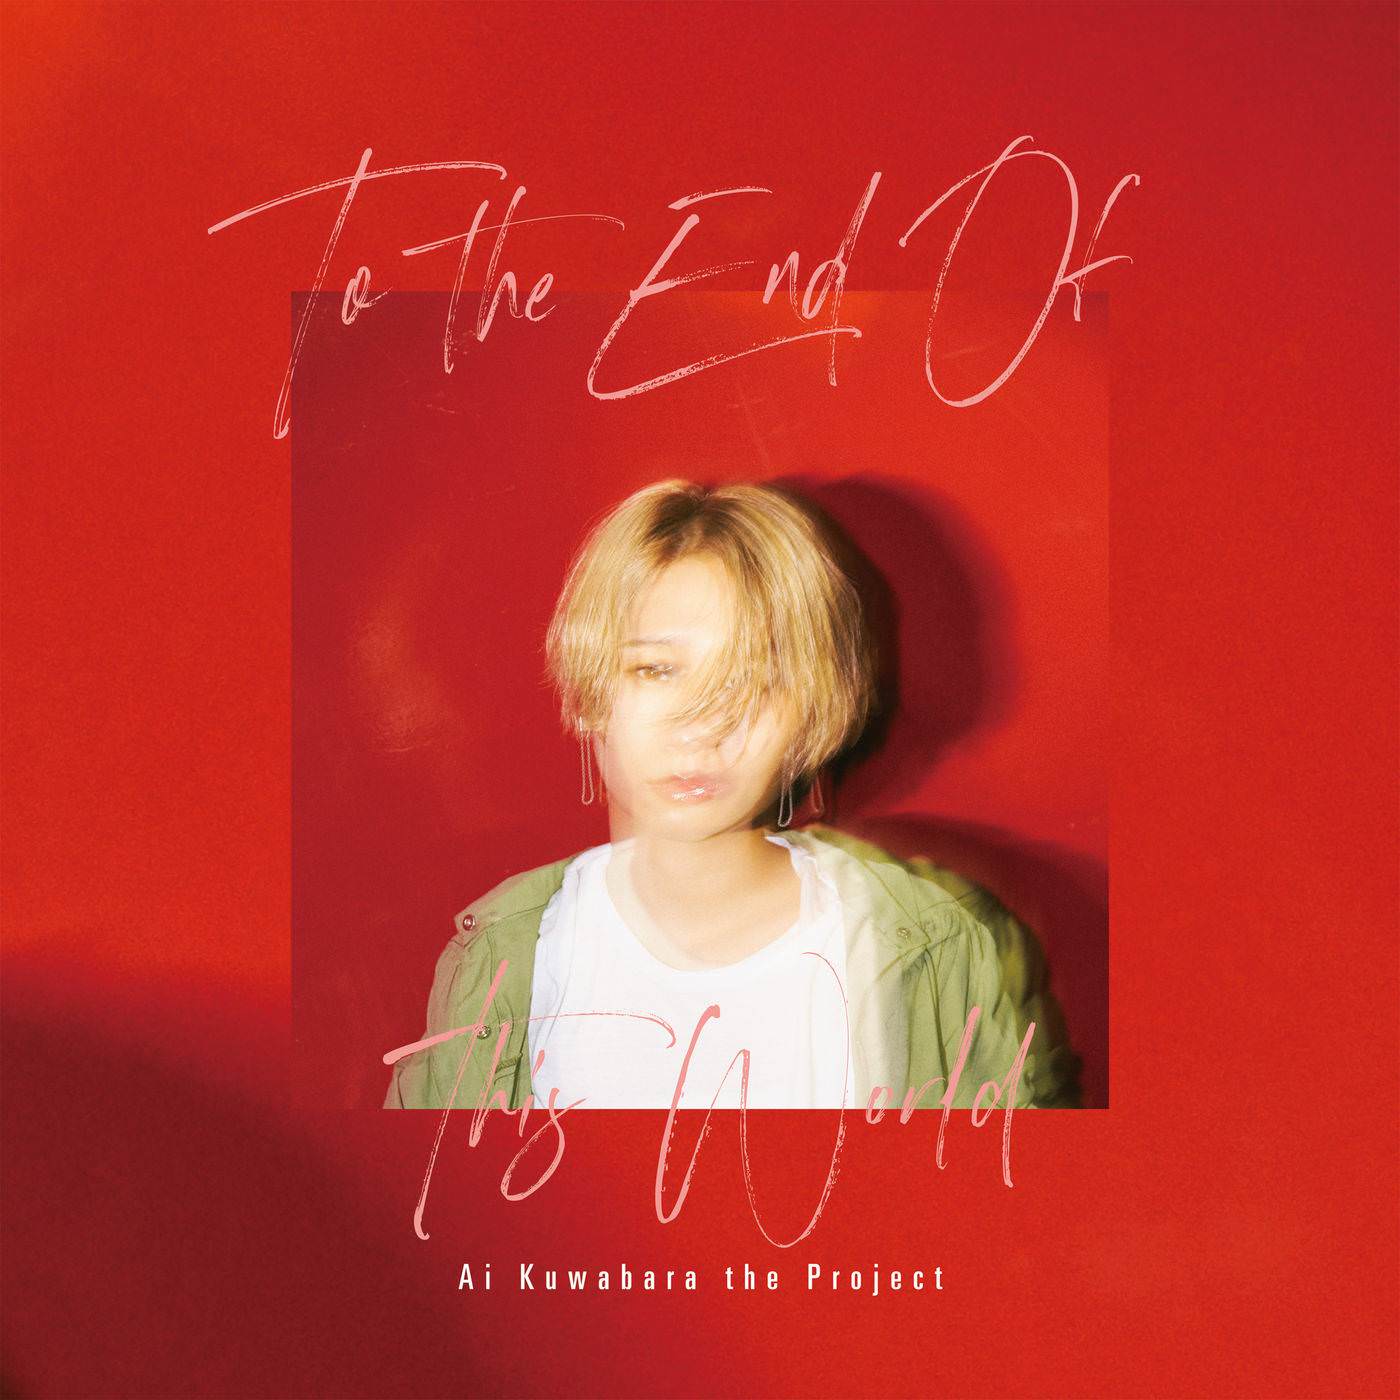 Ai Kuwabara The Project - To The End Of This World (2018) [FLAC 24bit/96kHz]